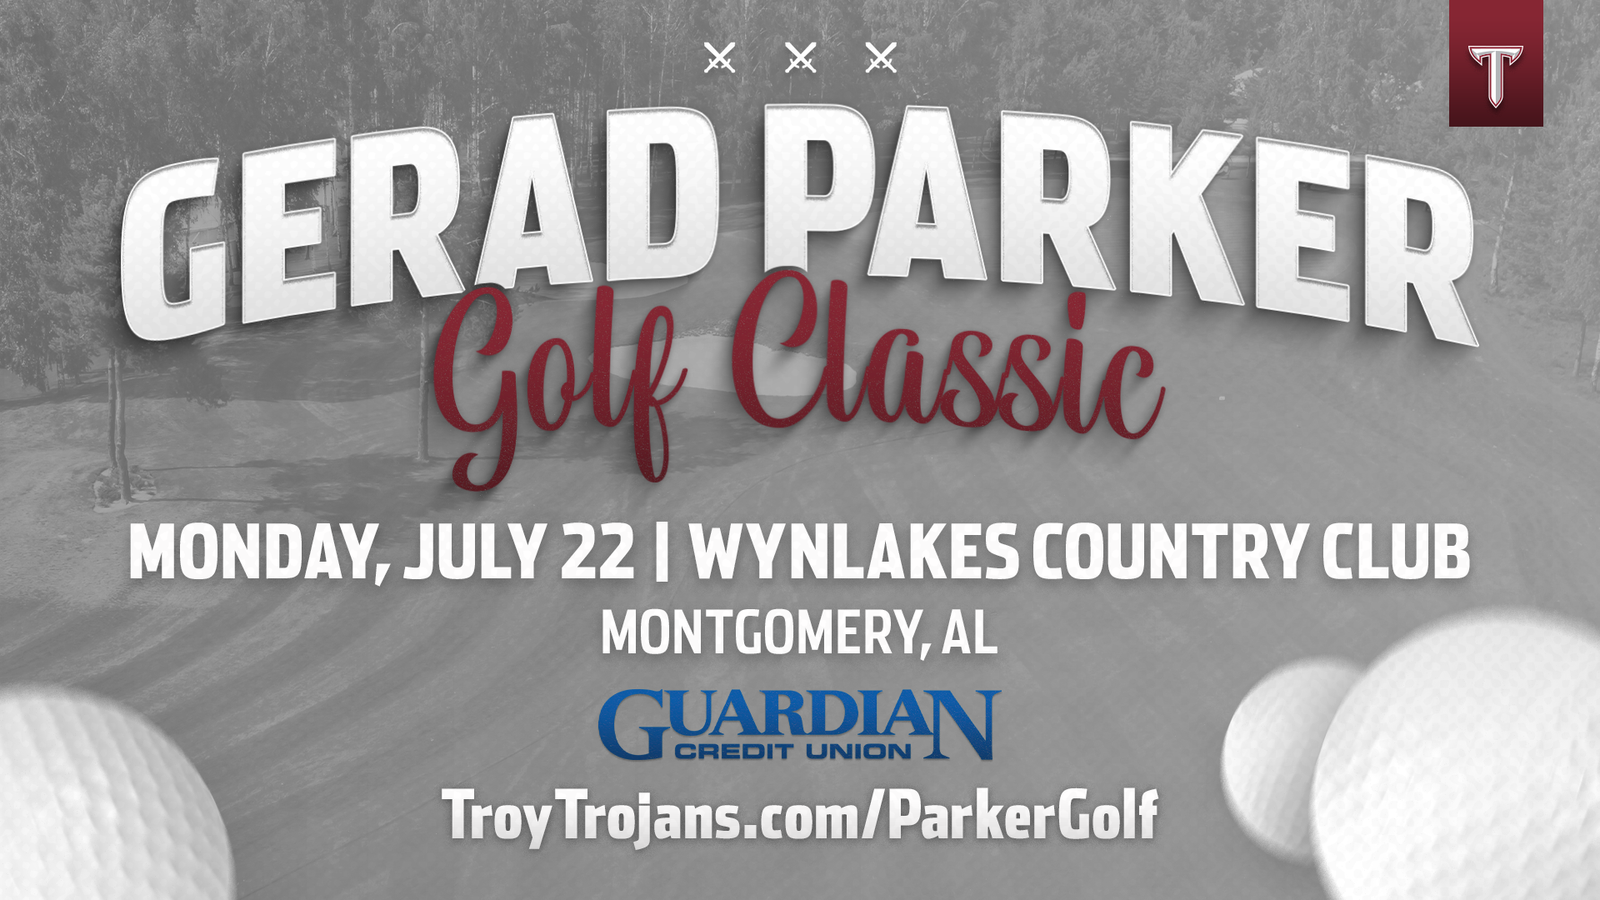 Inaugural Gerard Parker Golf Classic Set for July 22 at Wynlakes